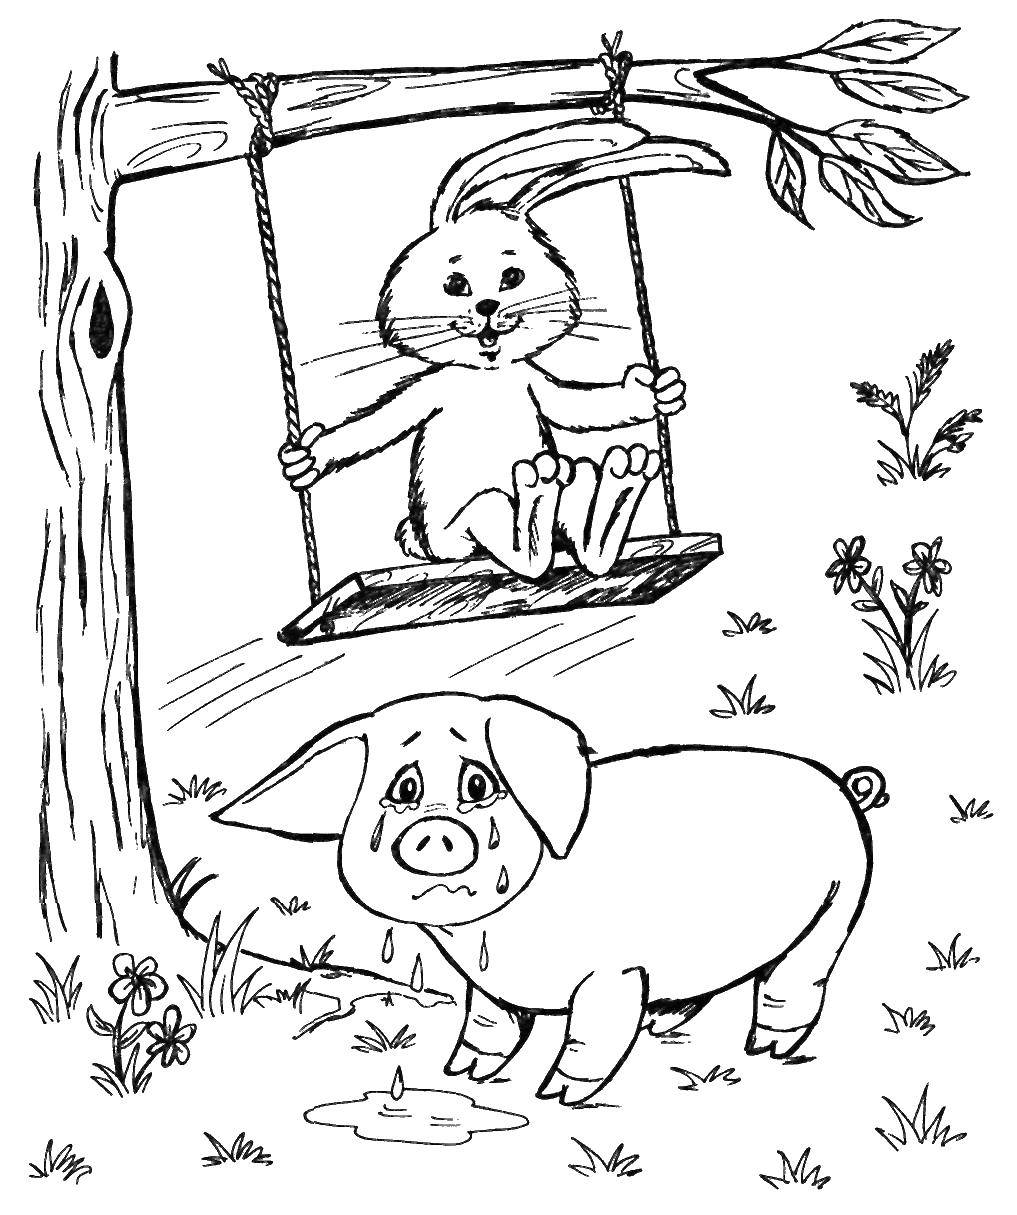 Coloring Bunny on a swing, pig crying. Category Animals. Tags:  hare, pig.